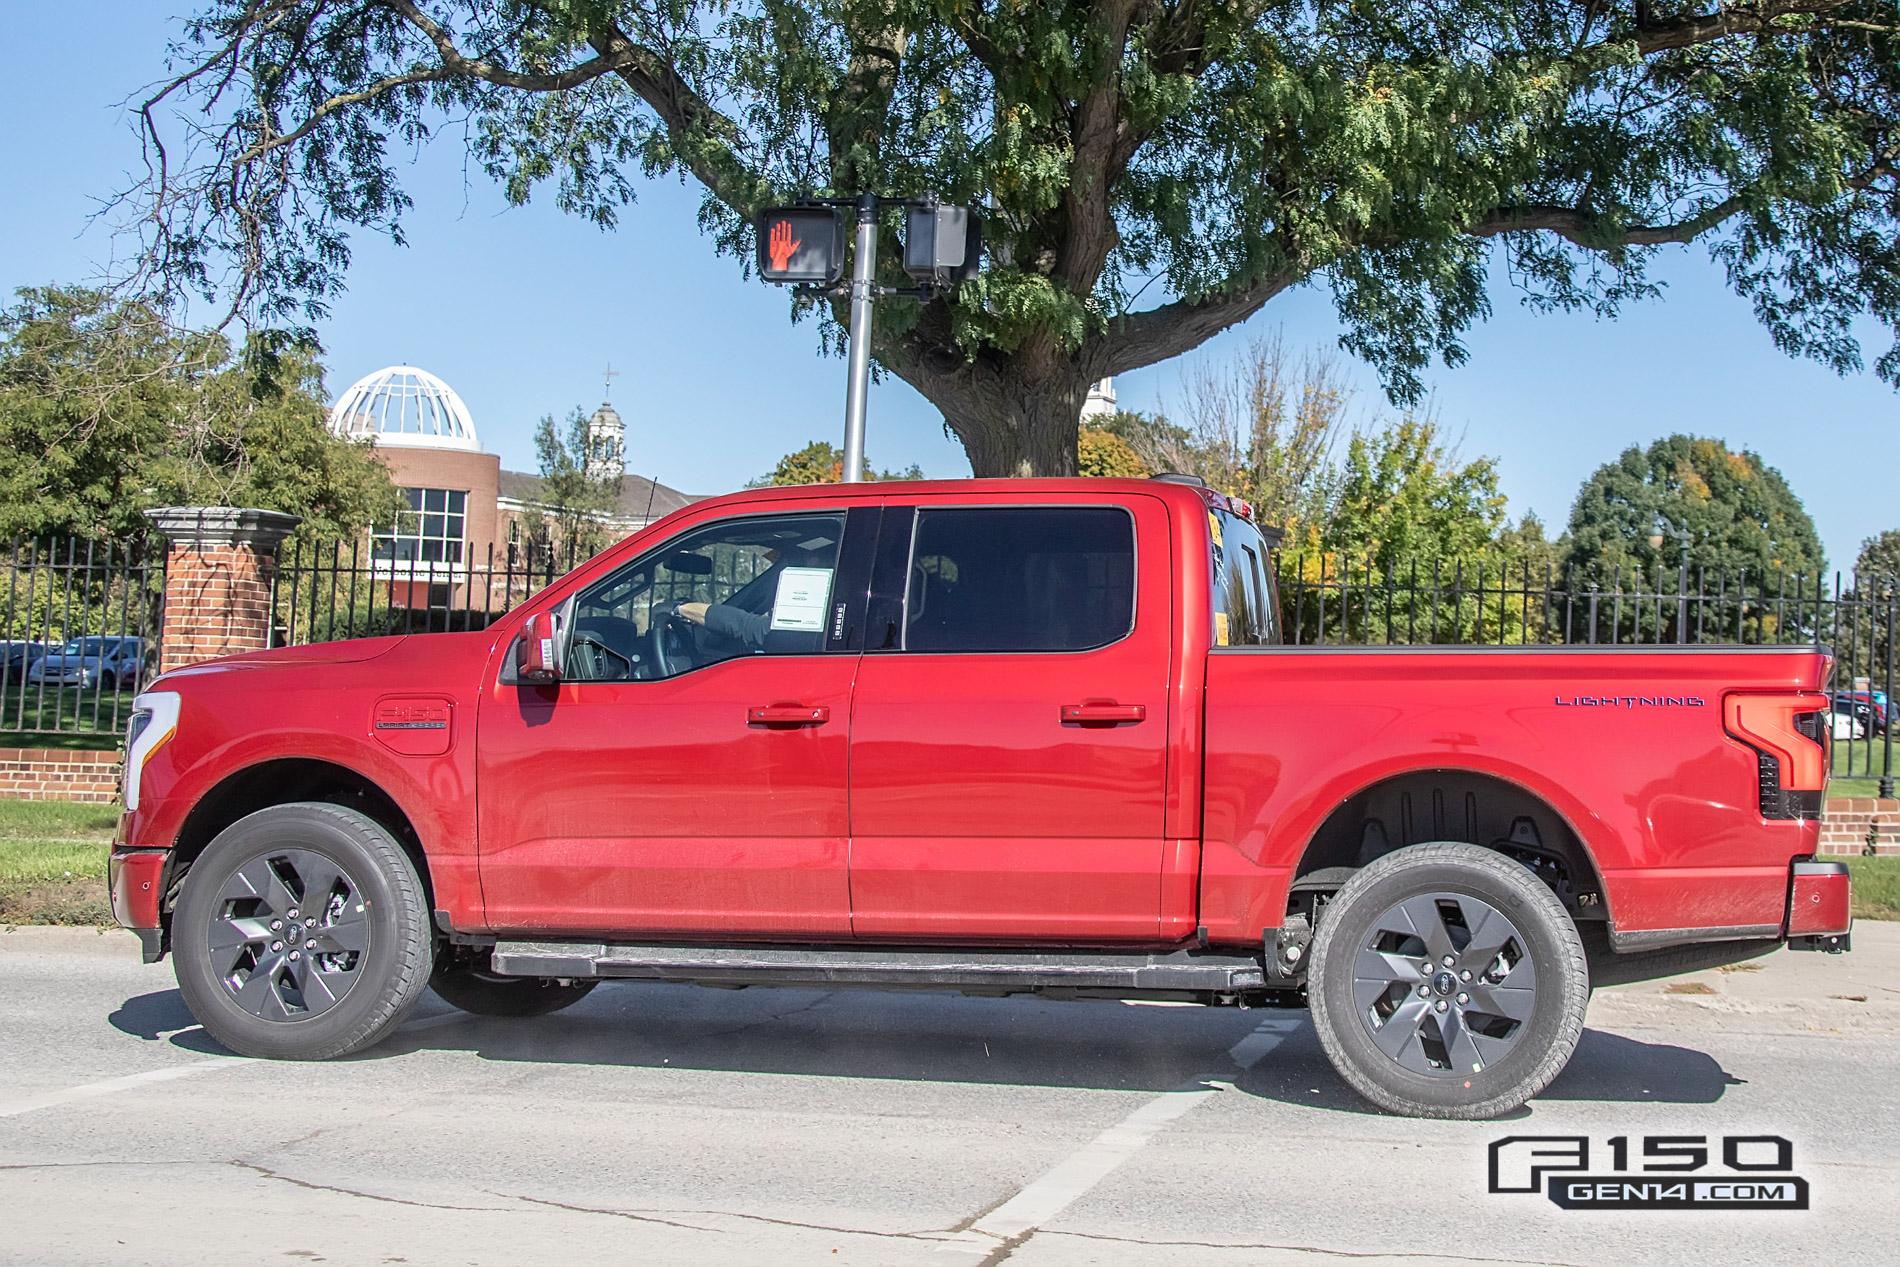 Ford F-150 Lightning F-150 Lightning Platinum (Iconic Silver) & Lariat (Rapid Red) Spotted On Public Roads Production Rapid Red 2022 F150 Lightning Lariat EV Pickup Truck 8